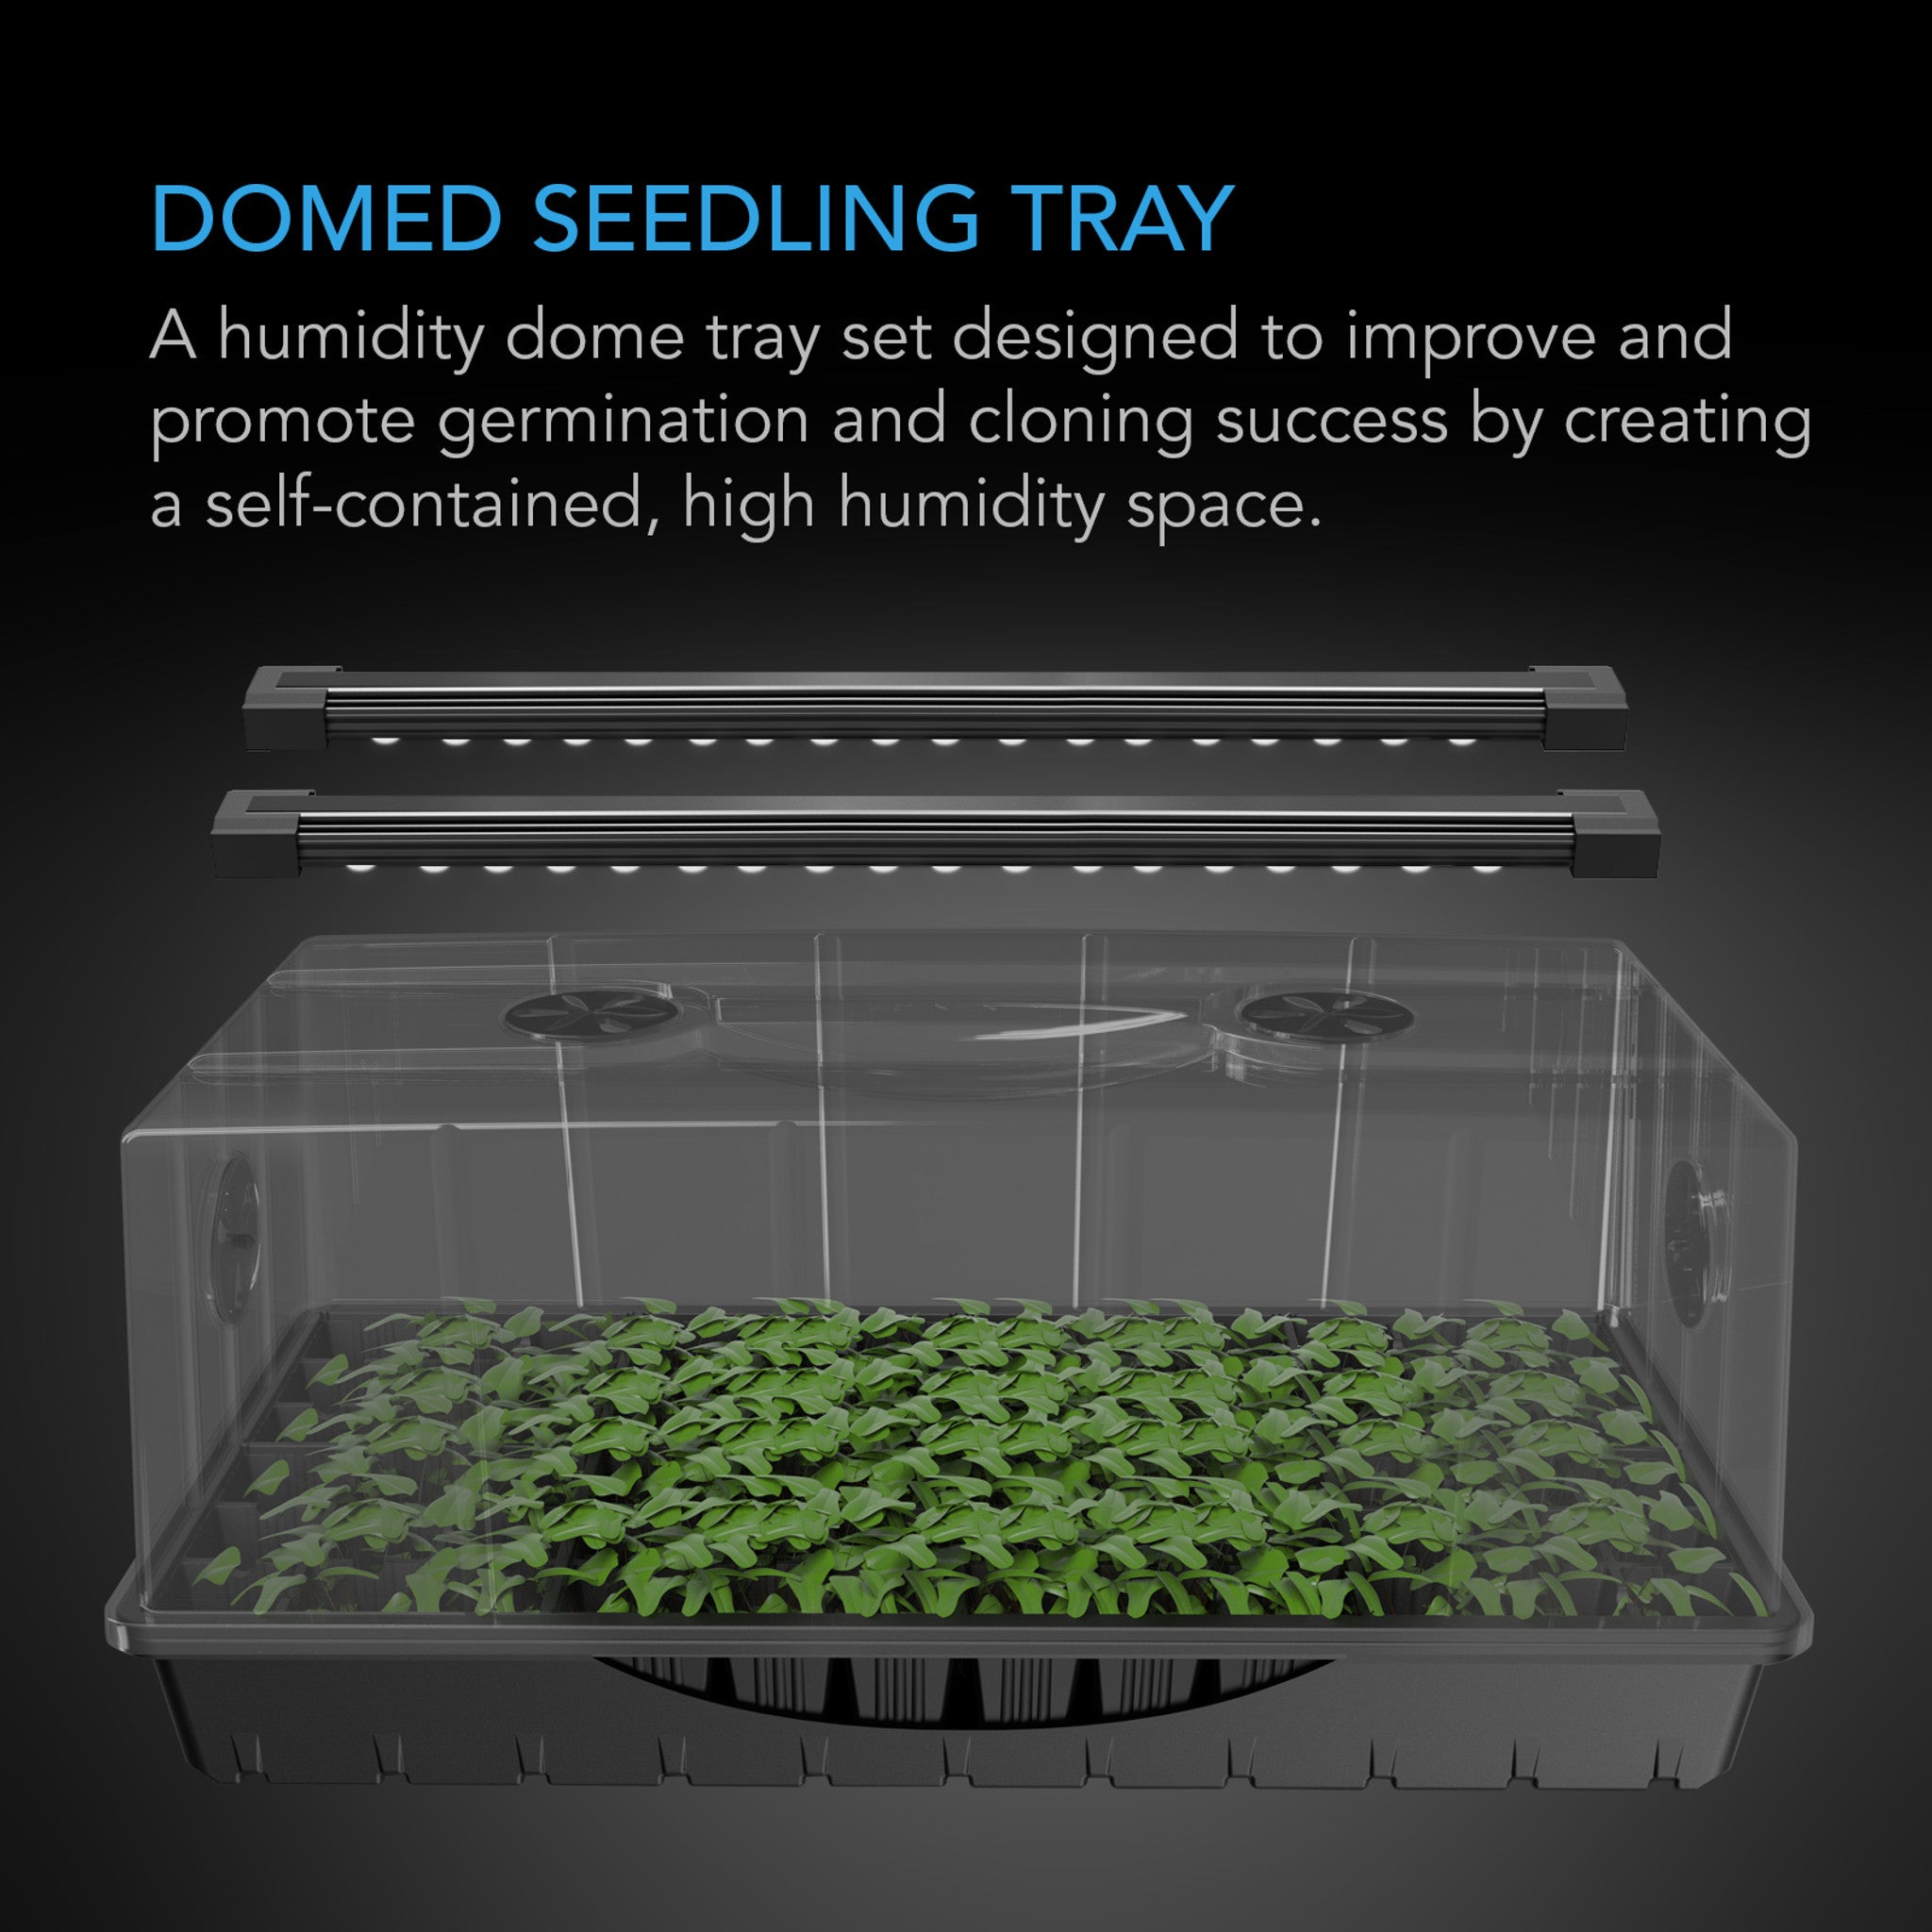 HUMIDITY DOME, GERMINATION KIT WITH LED GROW LIGHT BARS, 6X12 CELL TRAY